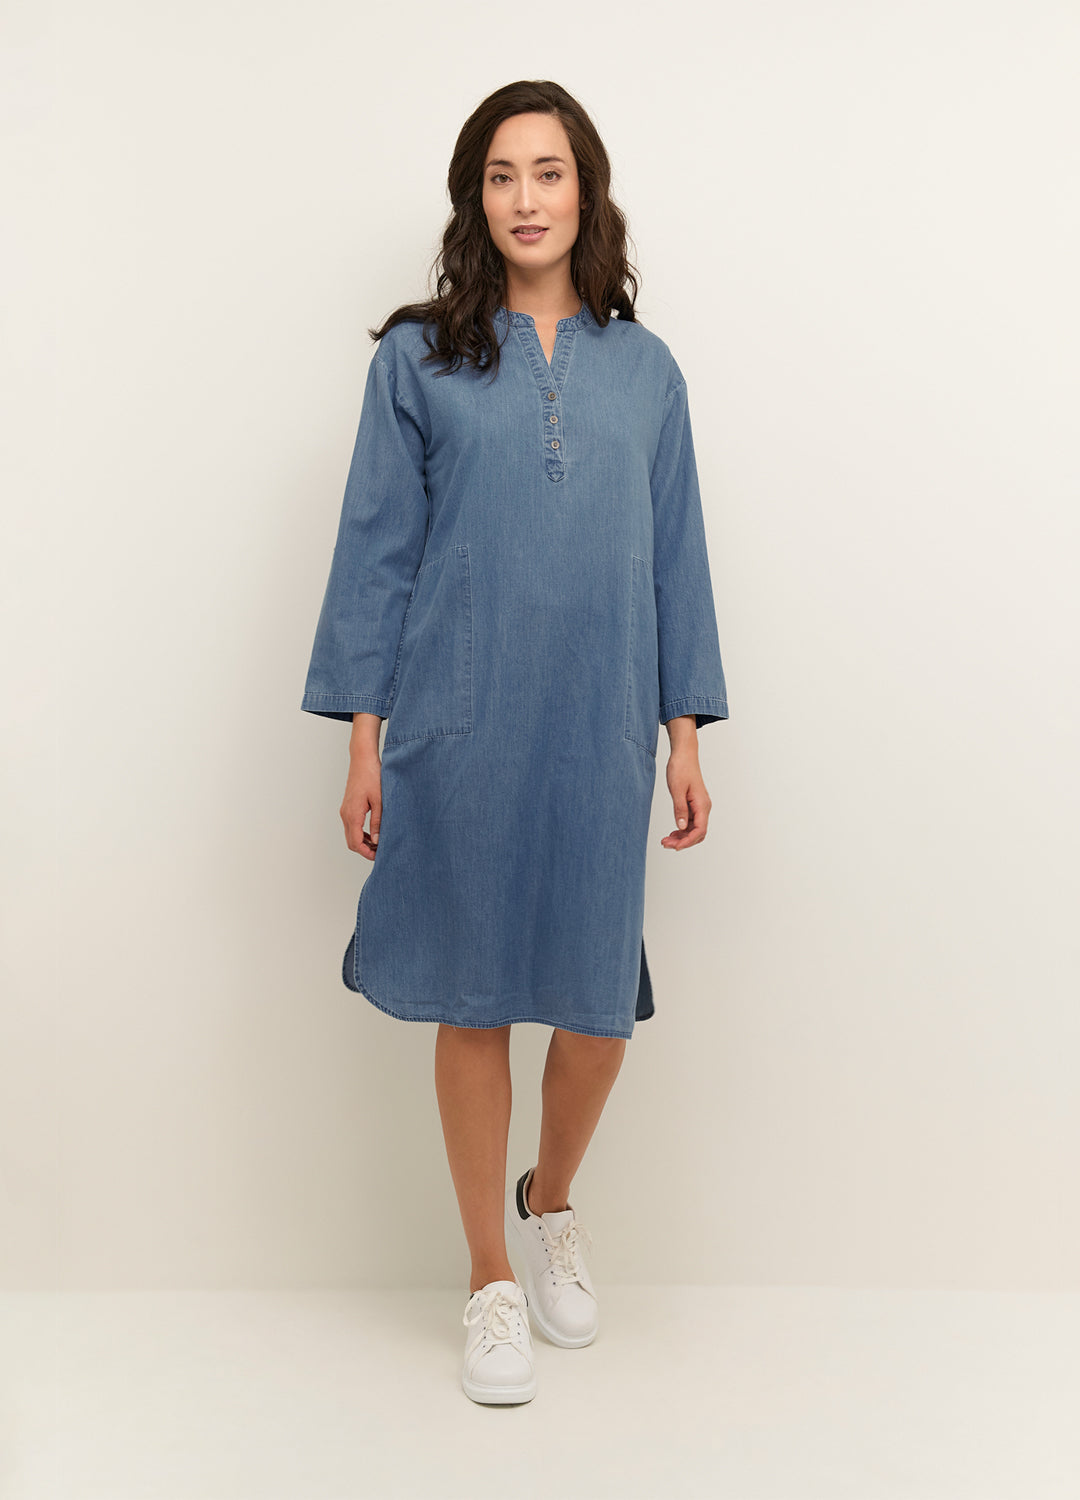 Outfit idea for the Cream Clothing Viola Dress in Blue Denim at Inner Beach Co, Toronto, Ontario, Canada